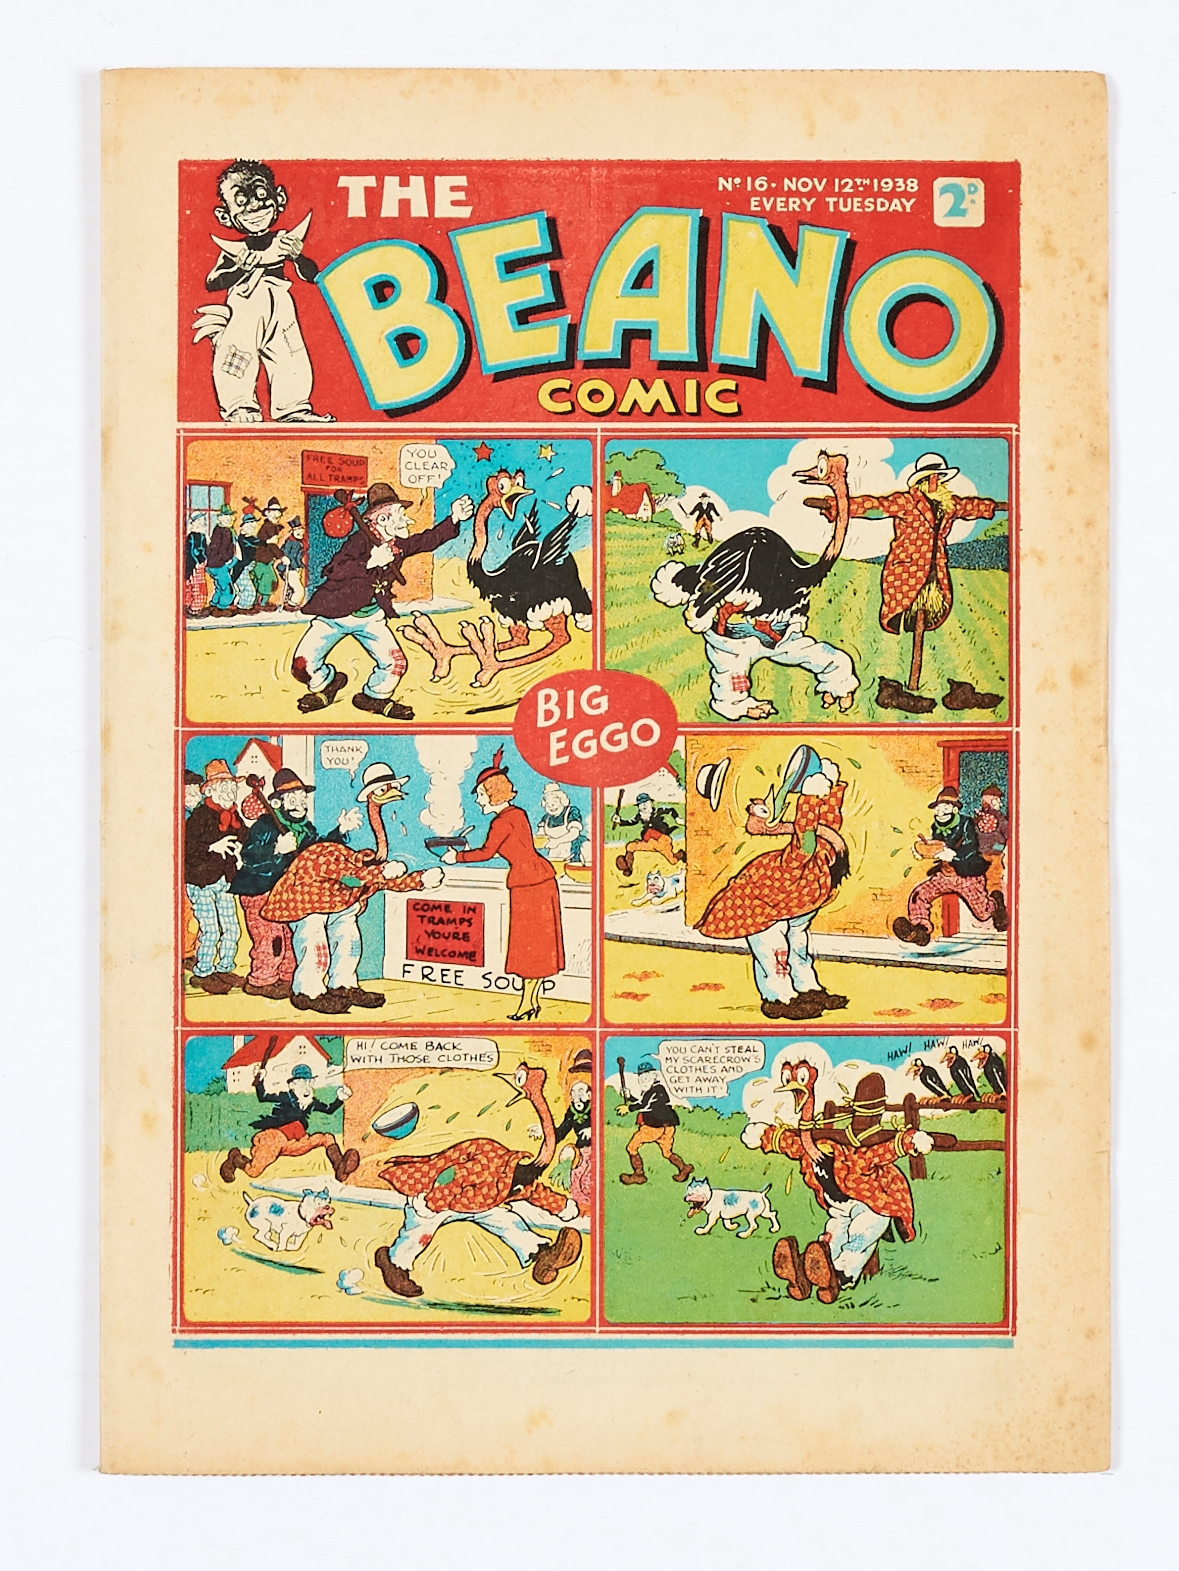 Beano No 16 (1938). Bright cover colours with some light margin foxing, cream/light tan pages [fn-]